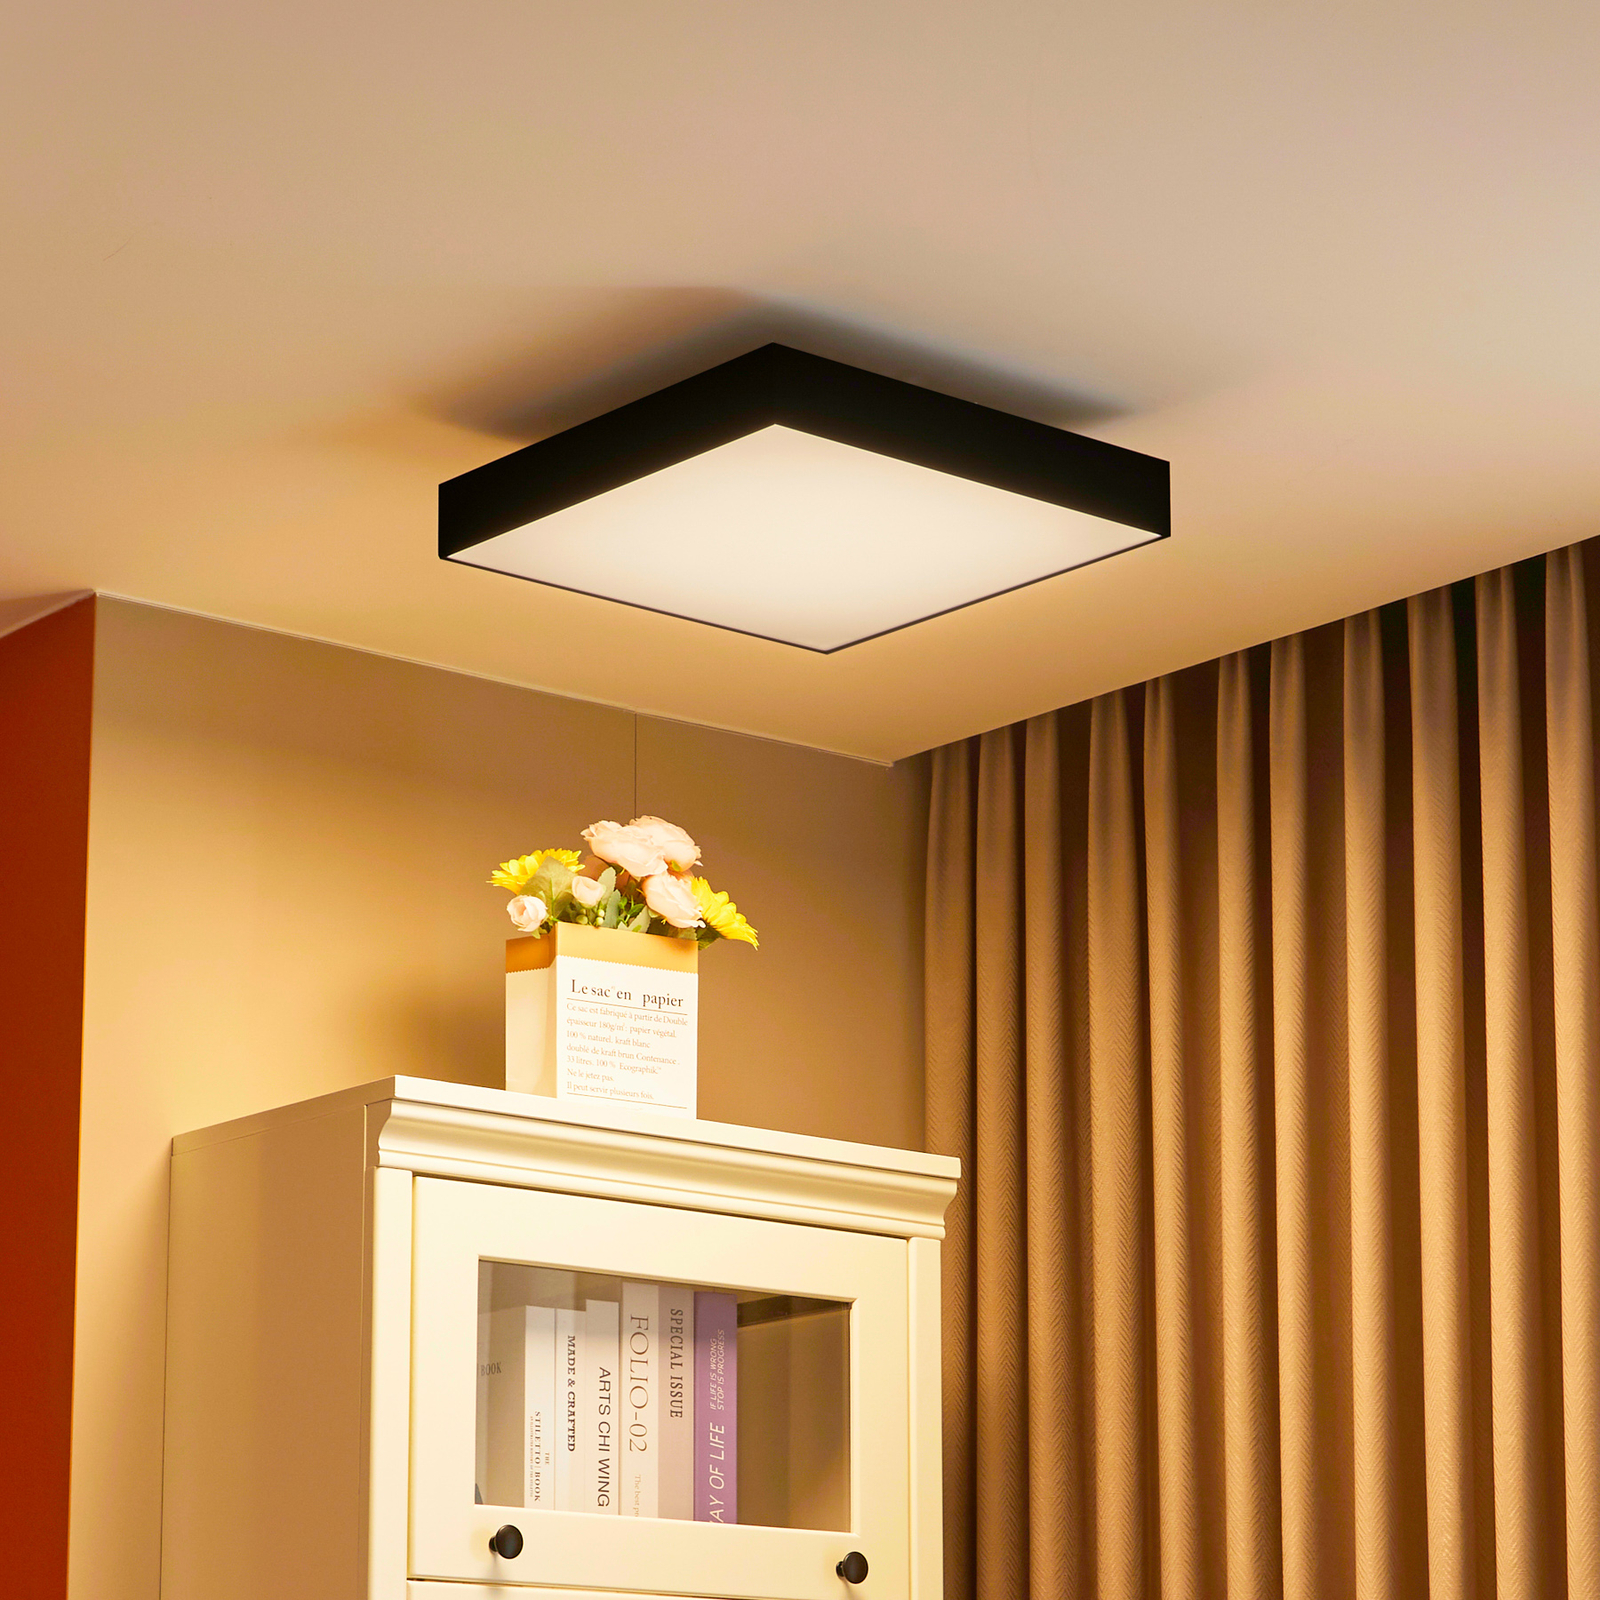 Lucande LED ceiling lamp Leicy, black, 40 cm, RGBIC, CCT